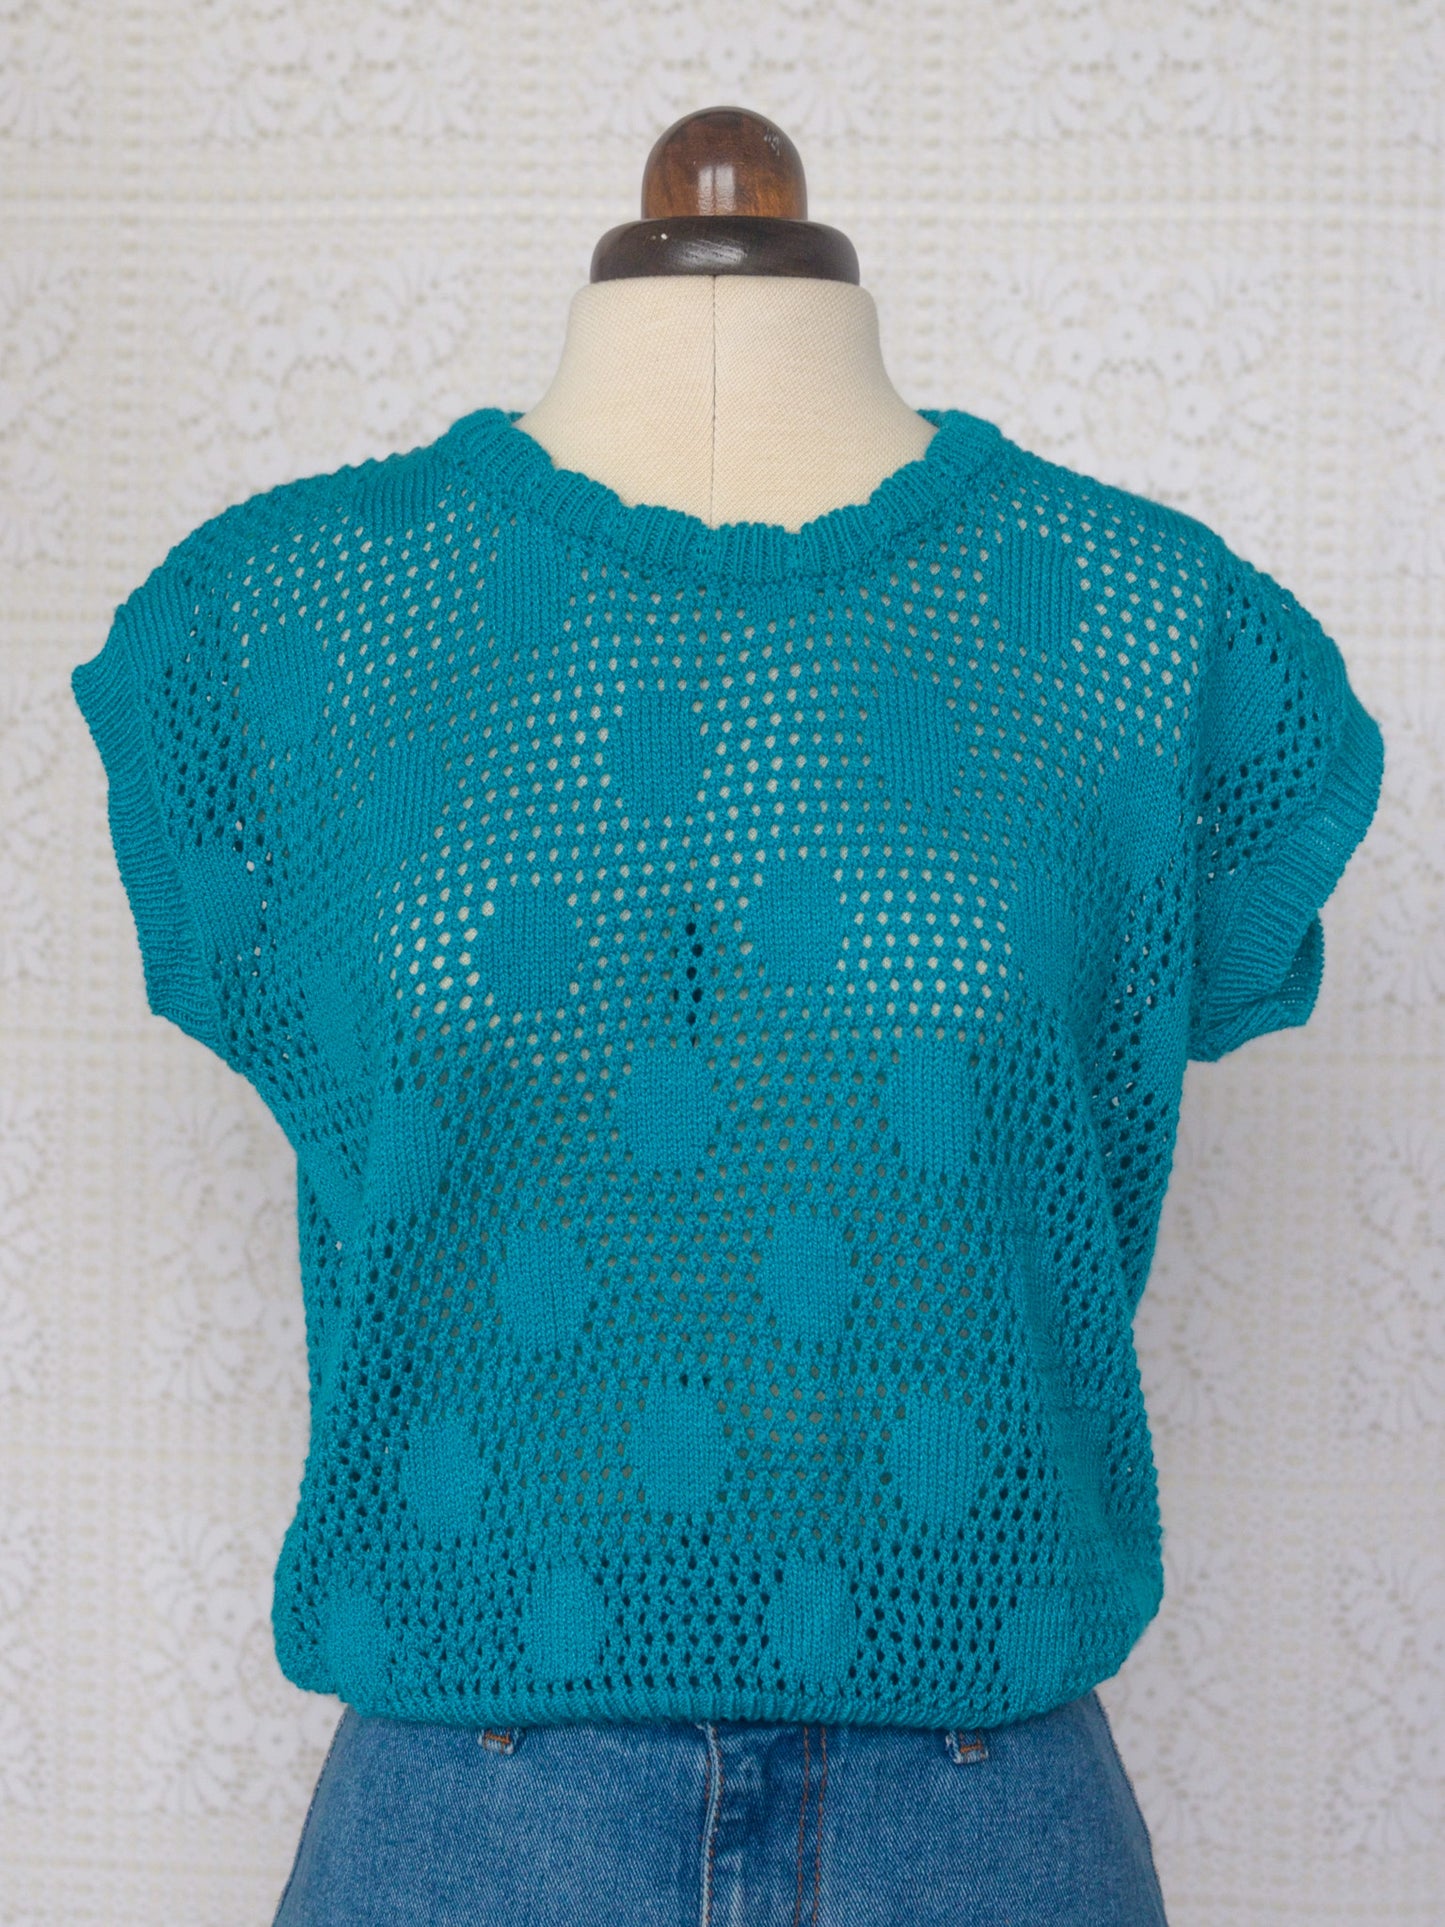 1980s style teal knitted sleeveless jumper with polkadot pattern